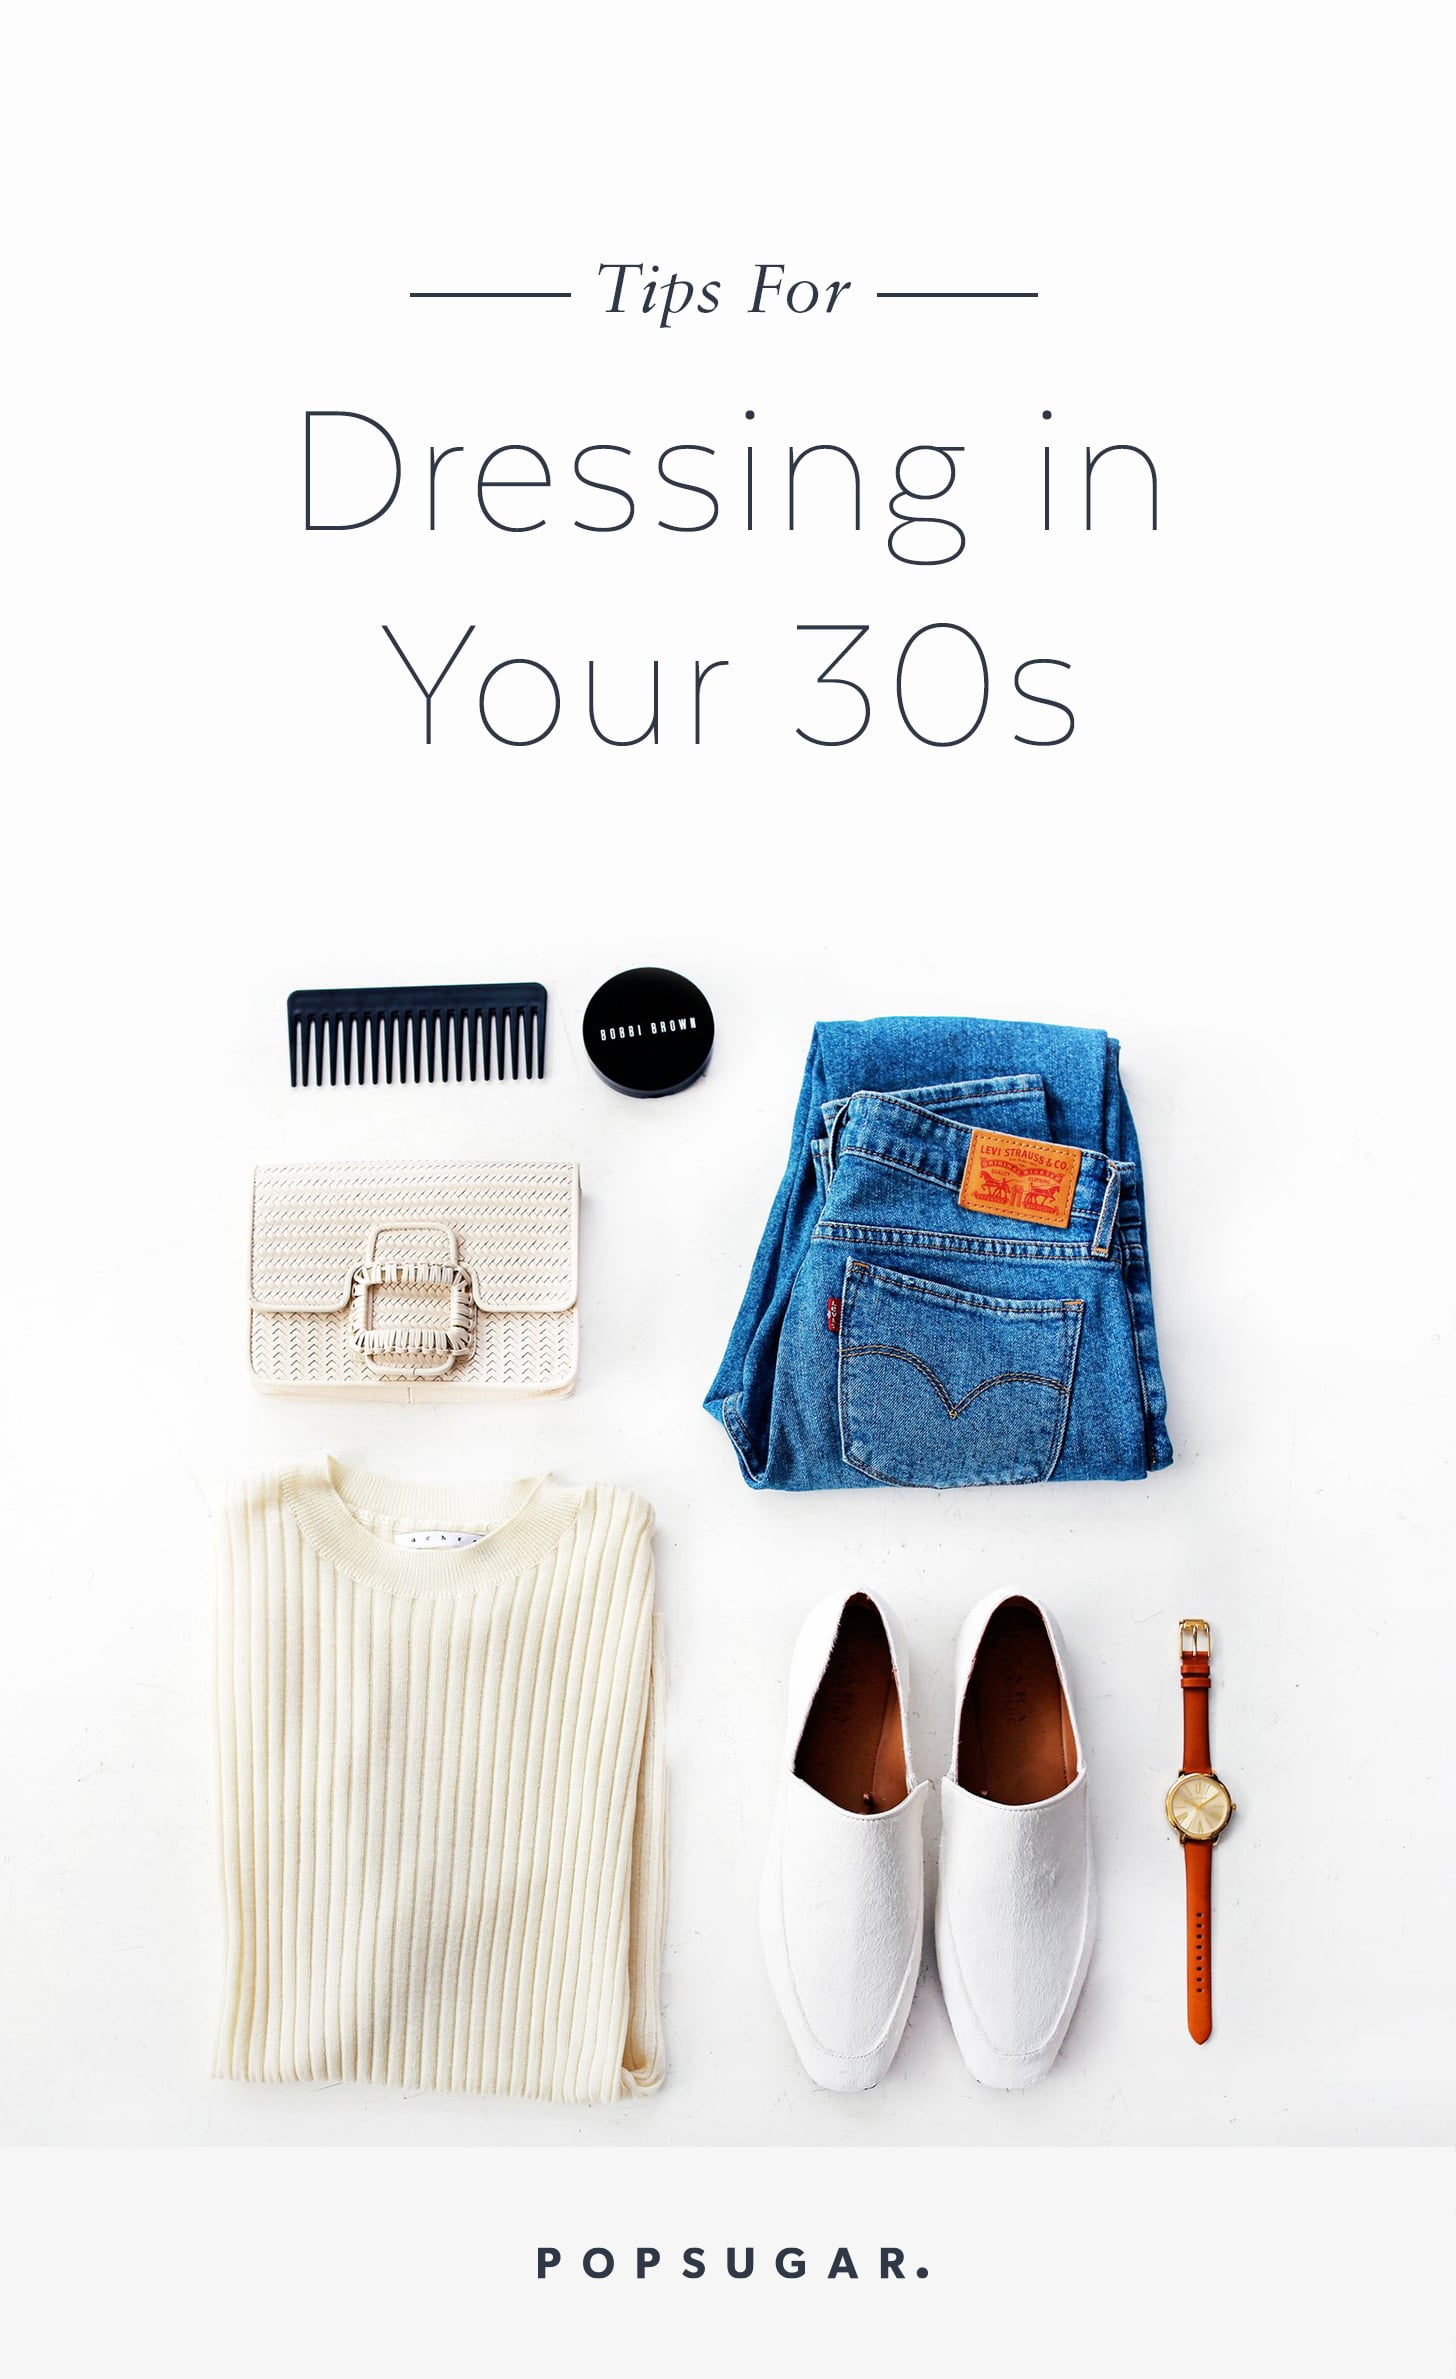 Tips For Dressing in Your 30s | POPSUGAR Fashion